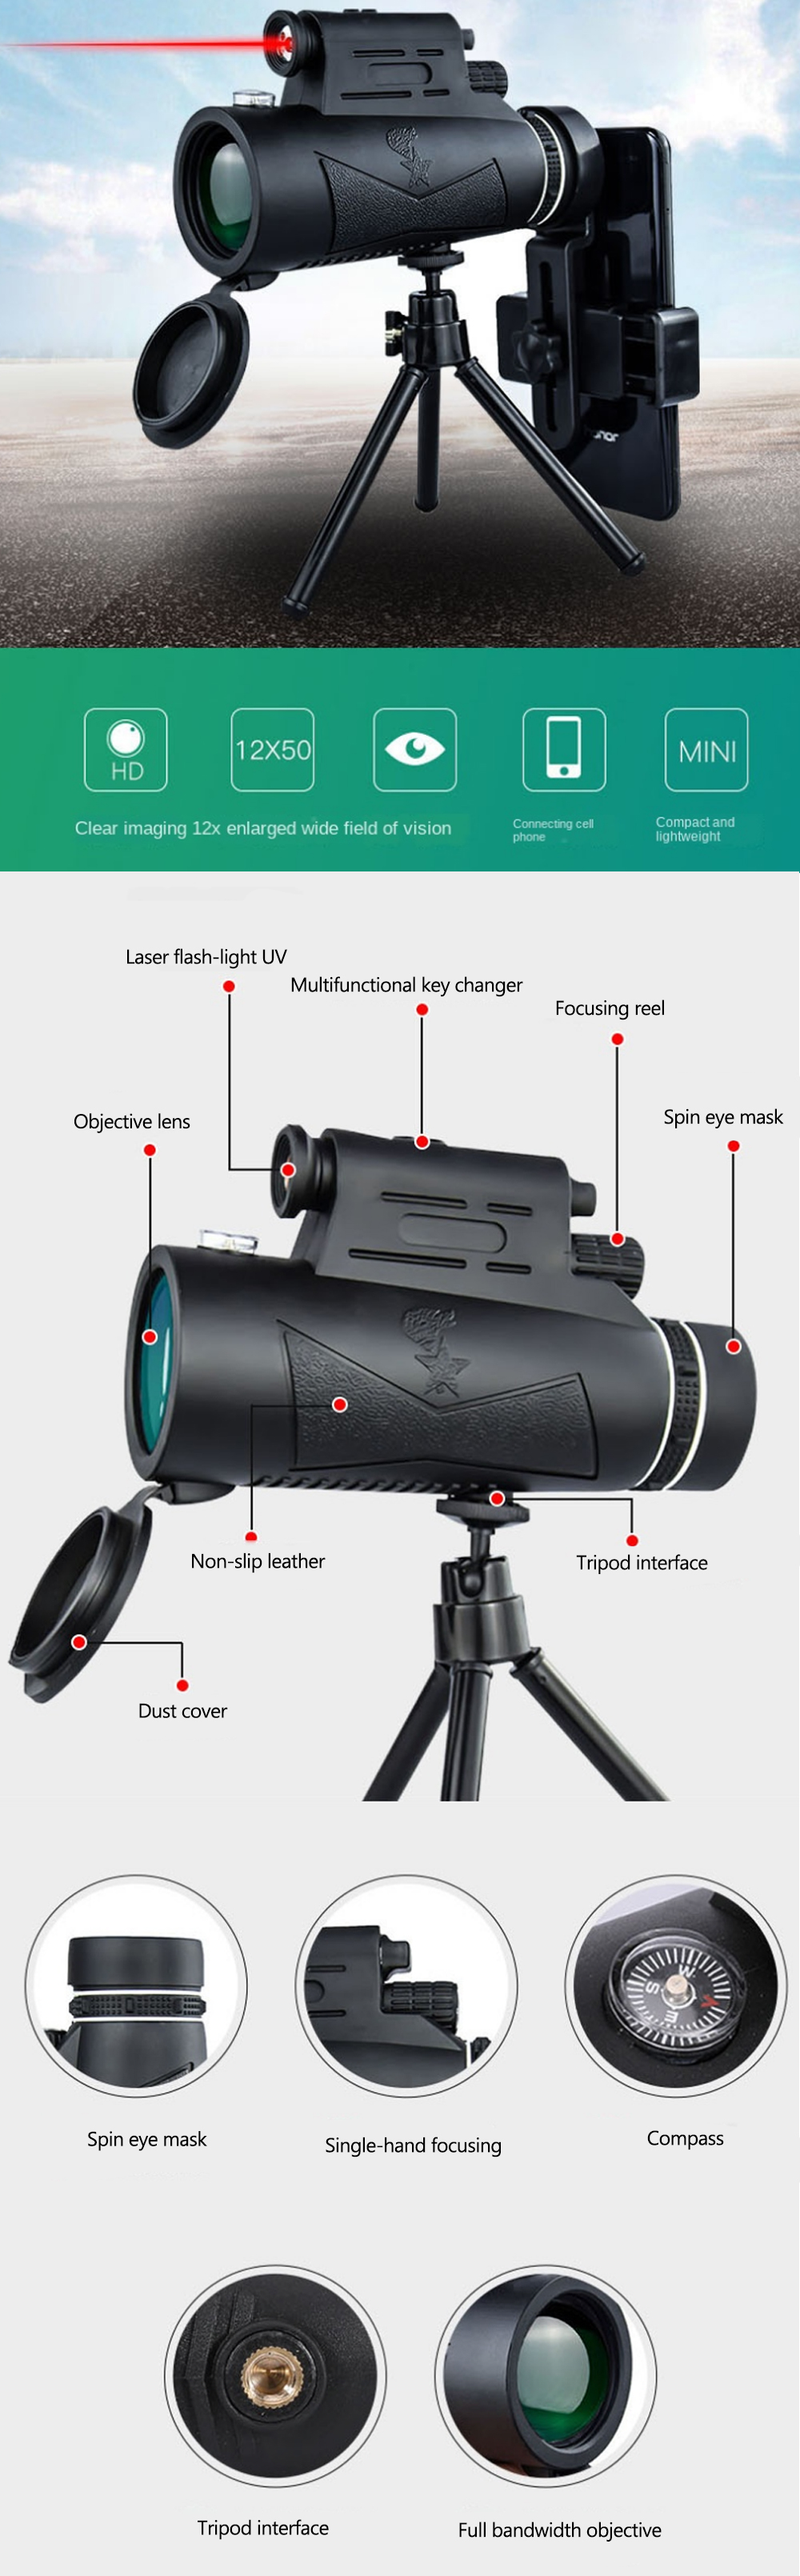 Moge-12X50-HD-Telescope-with-Laser-Flashlight-Phone-Adapter-Tripod-For-Outdoor-Camping-Travel-High-P-1838772-1